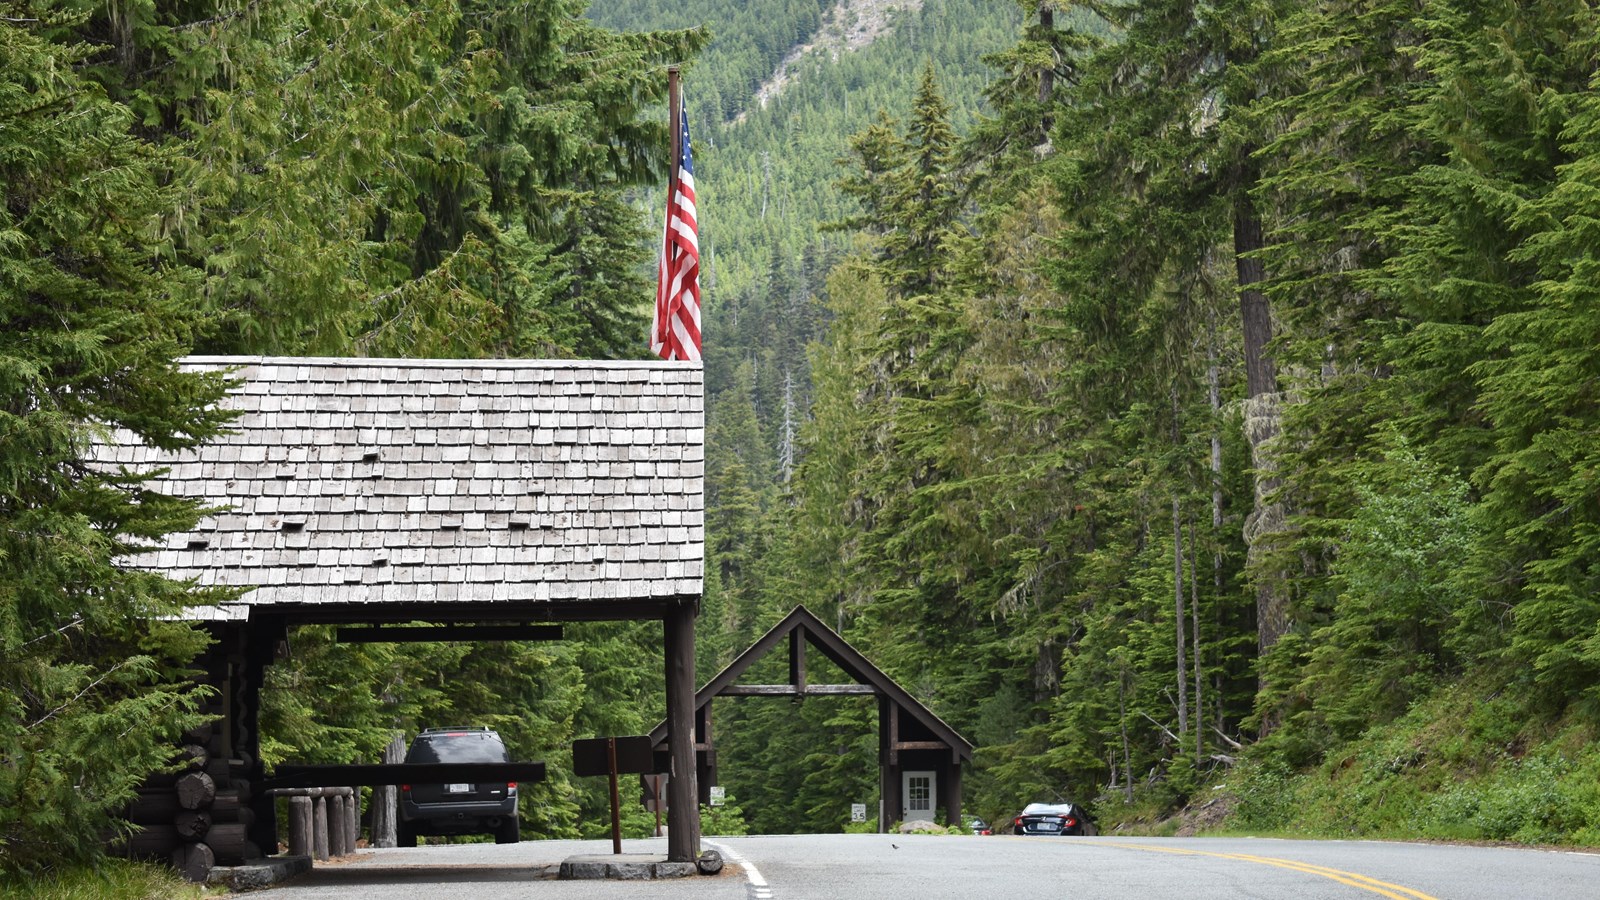 An American flag over a rustic porch roof with the high peaked roof of the entrance station beyond.